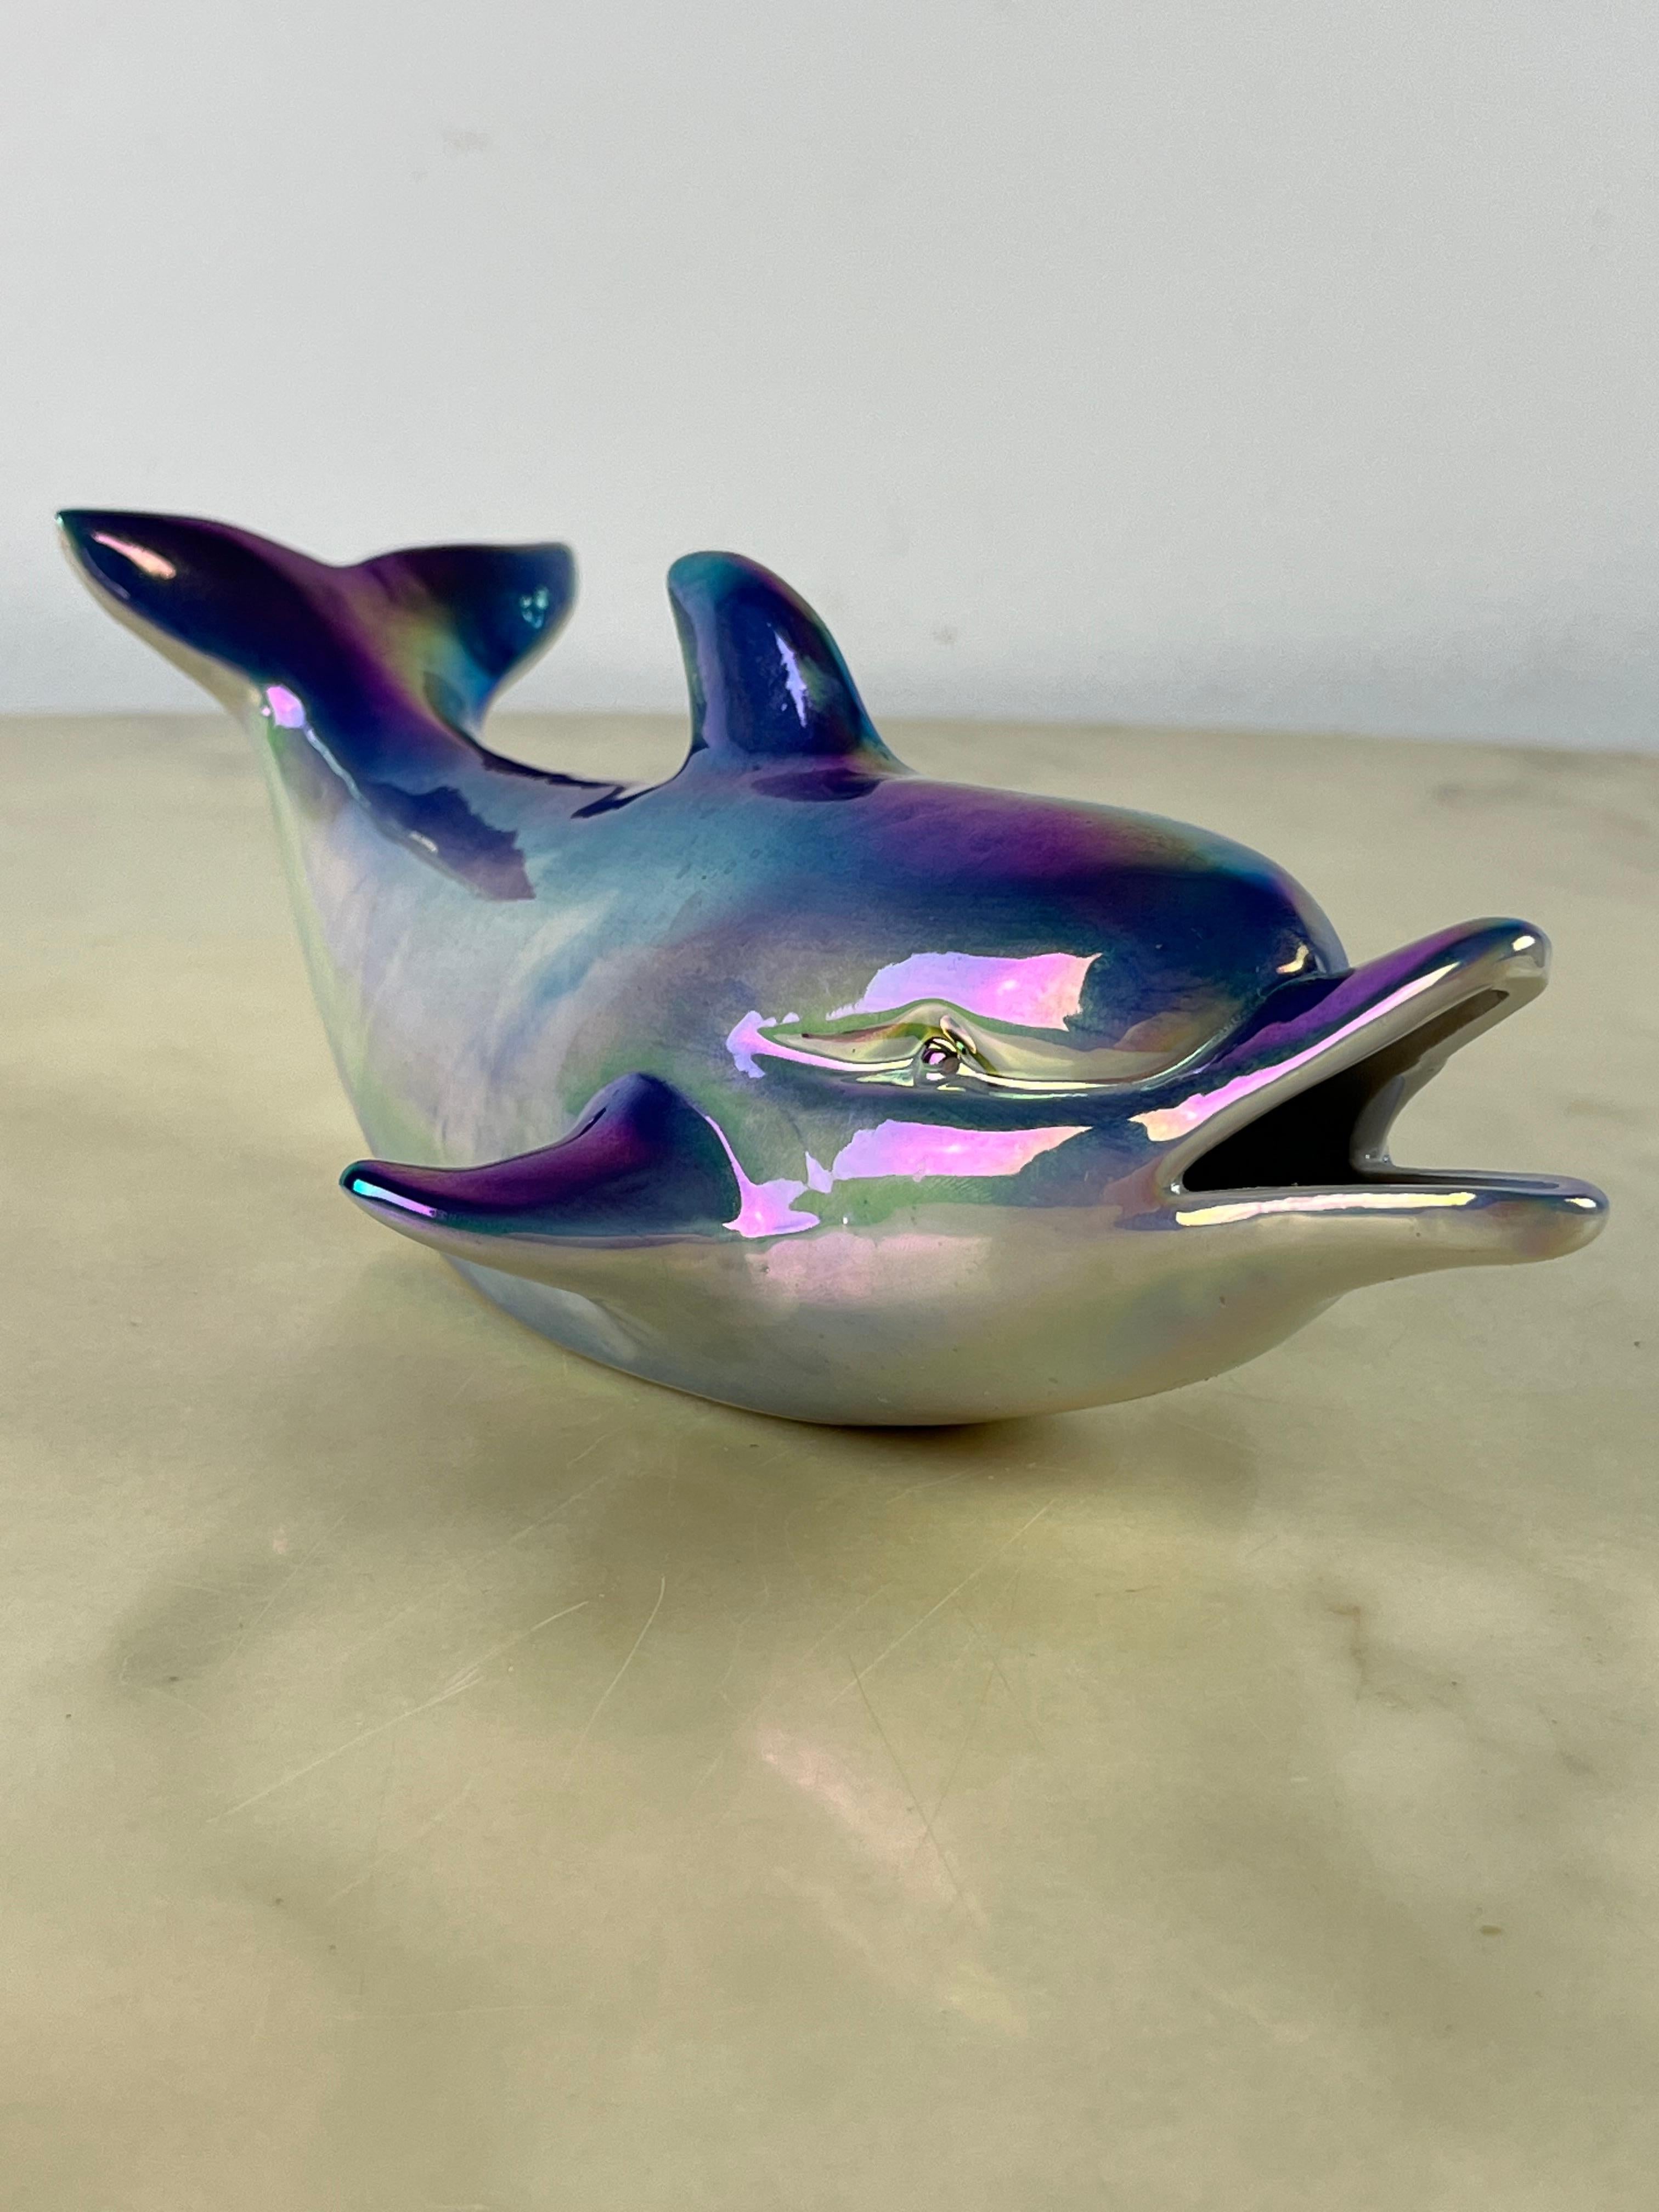 Glazed porcelain dolphin, Italy, 1950s
It belonged to my great-grandmother and is intact with very small signs of aging, almost invisible.